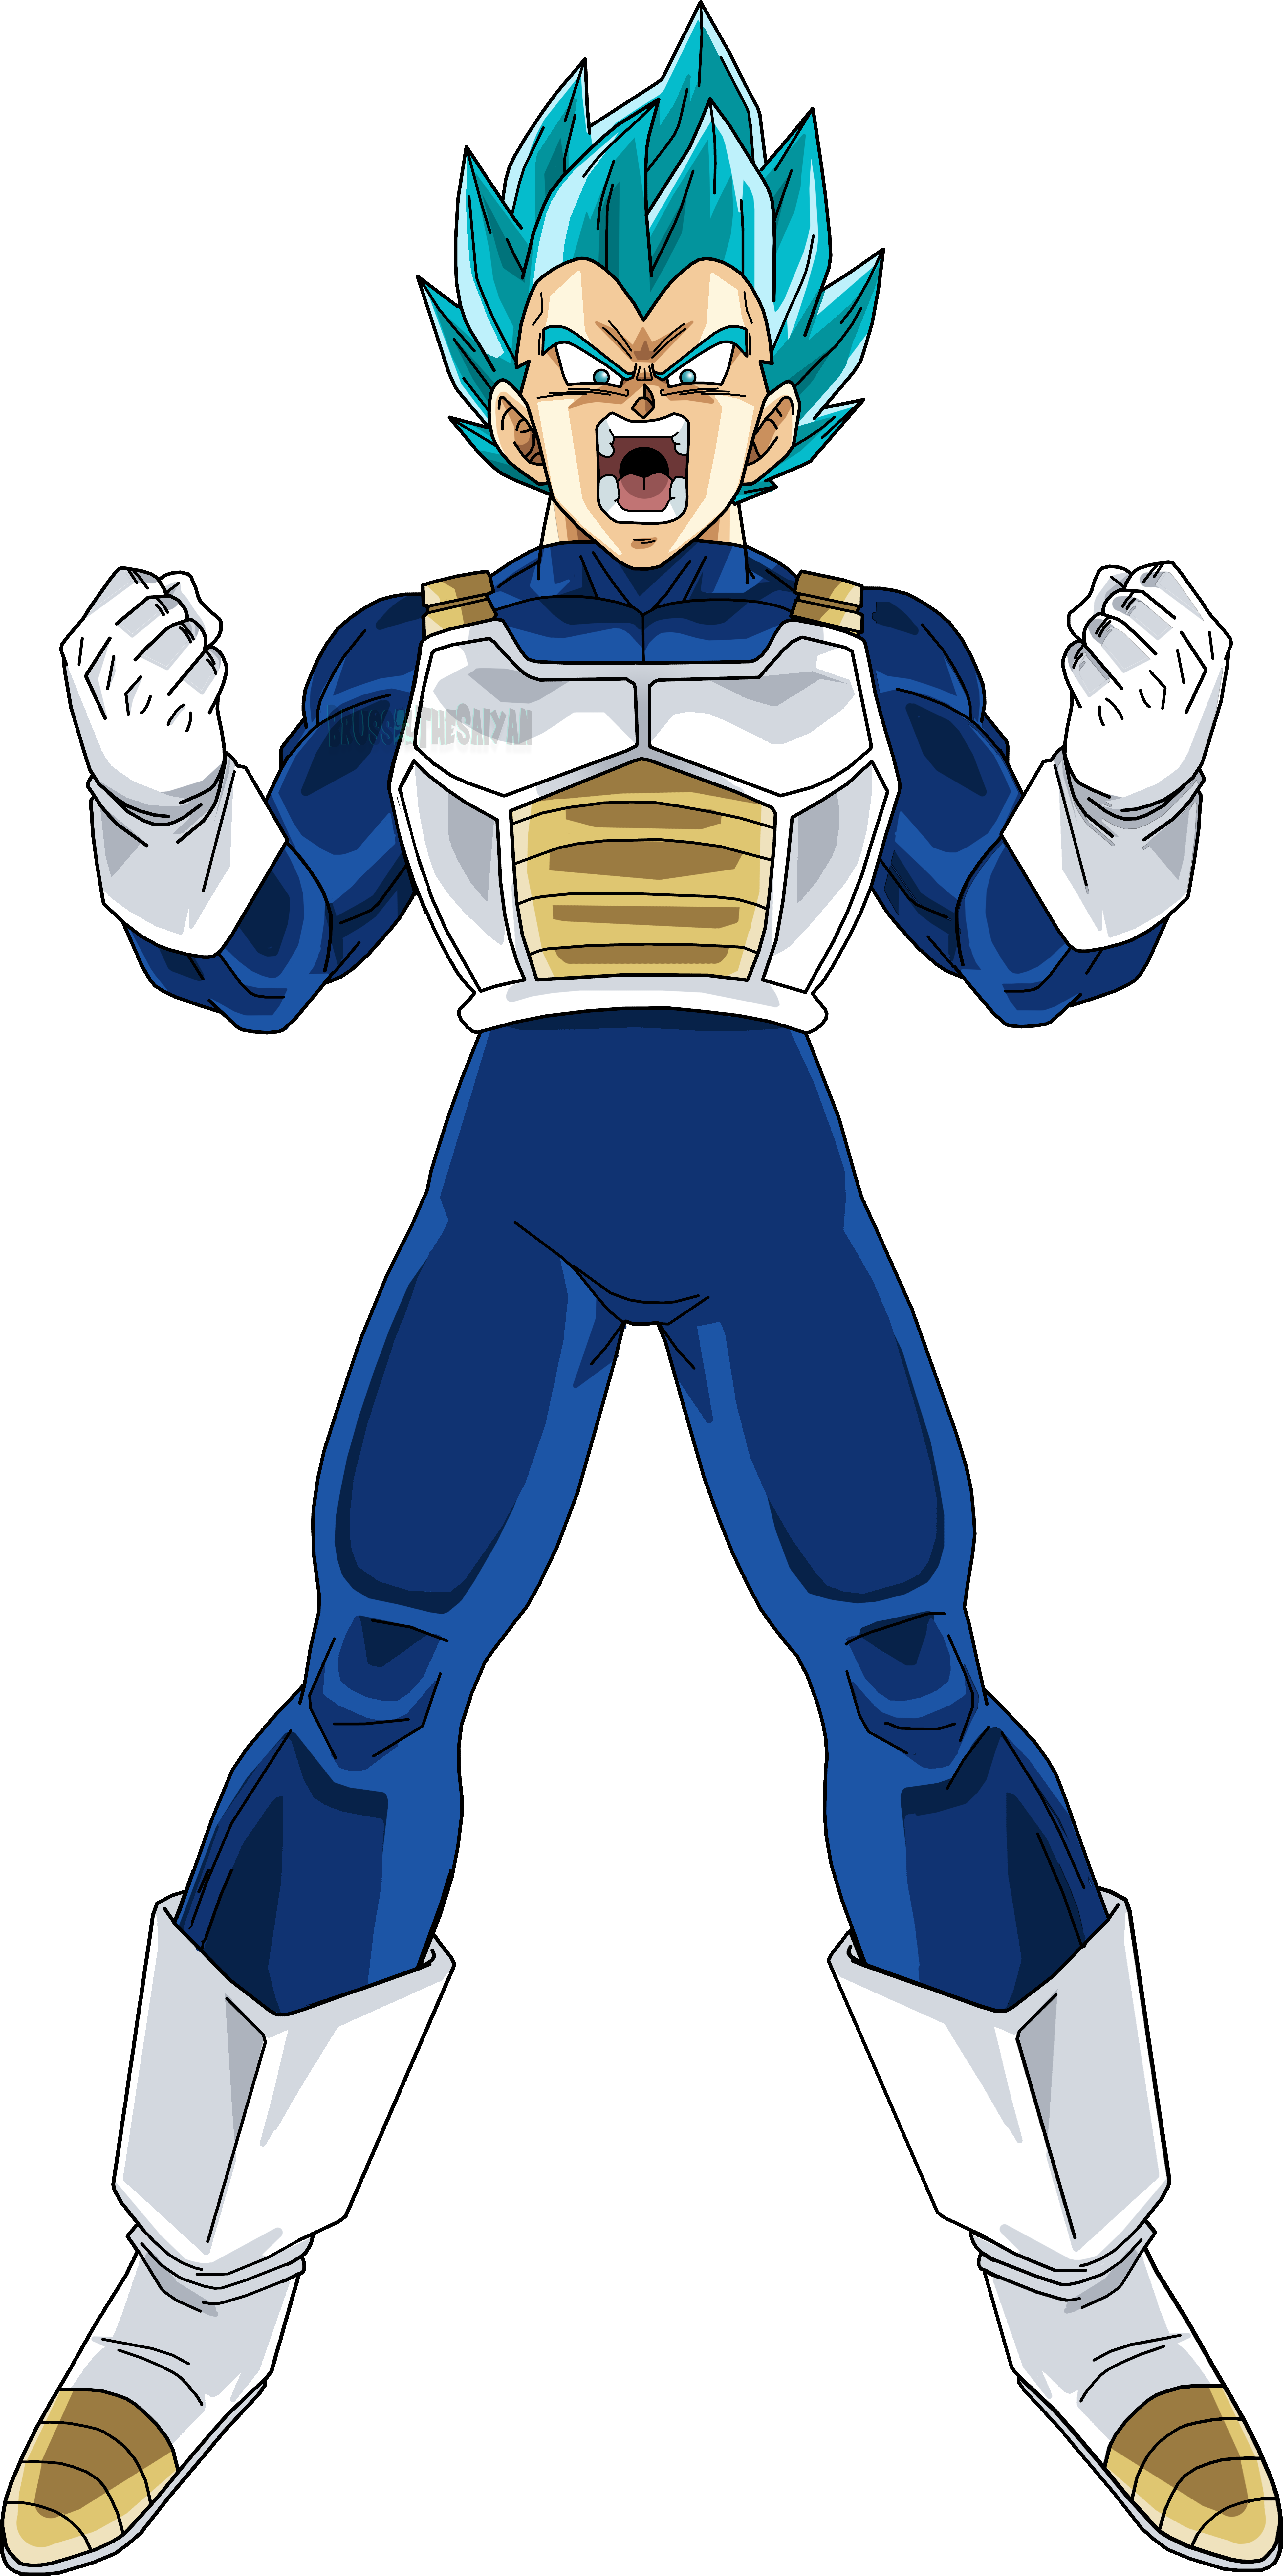 The Best Vegeta Quotes of All Time (With Images)